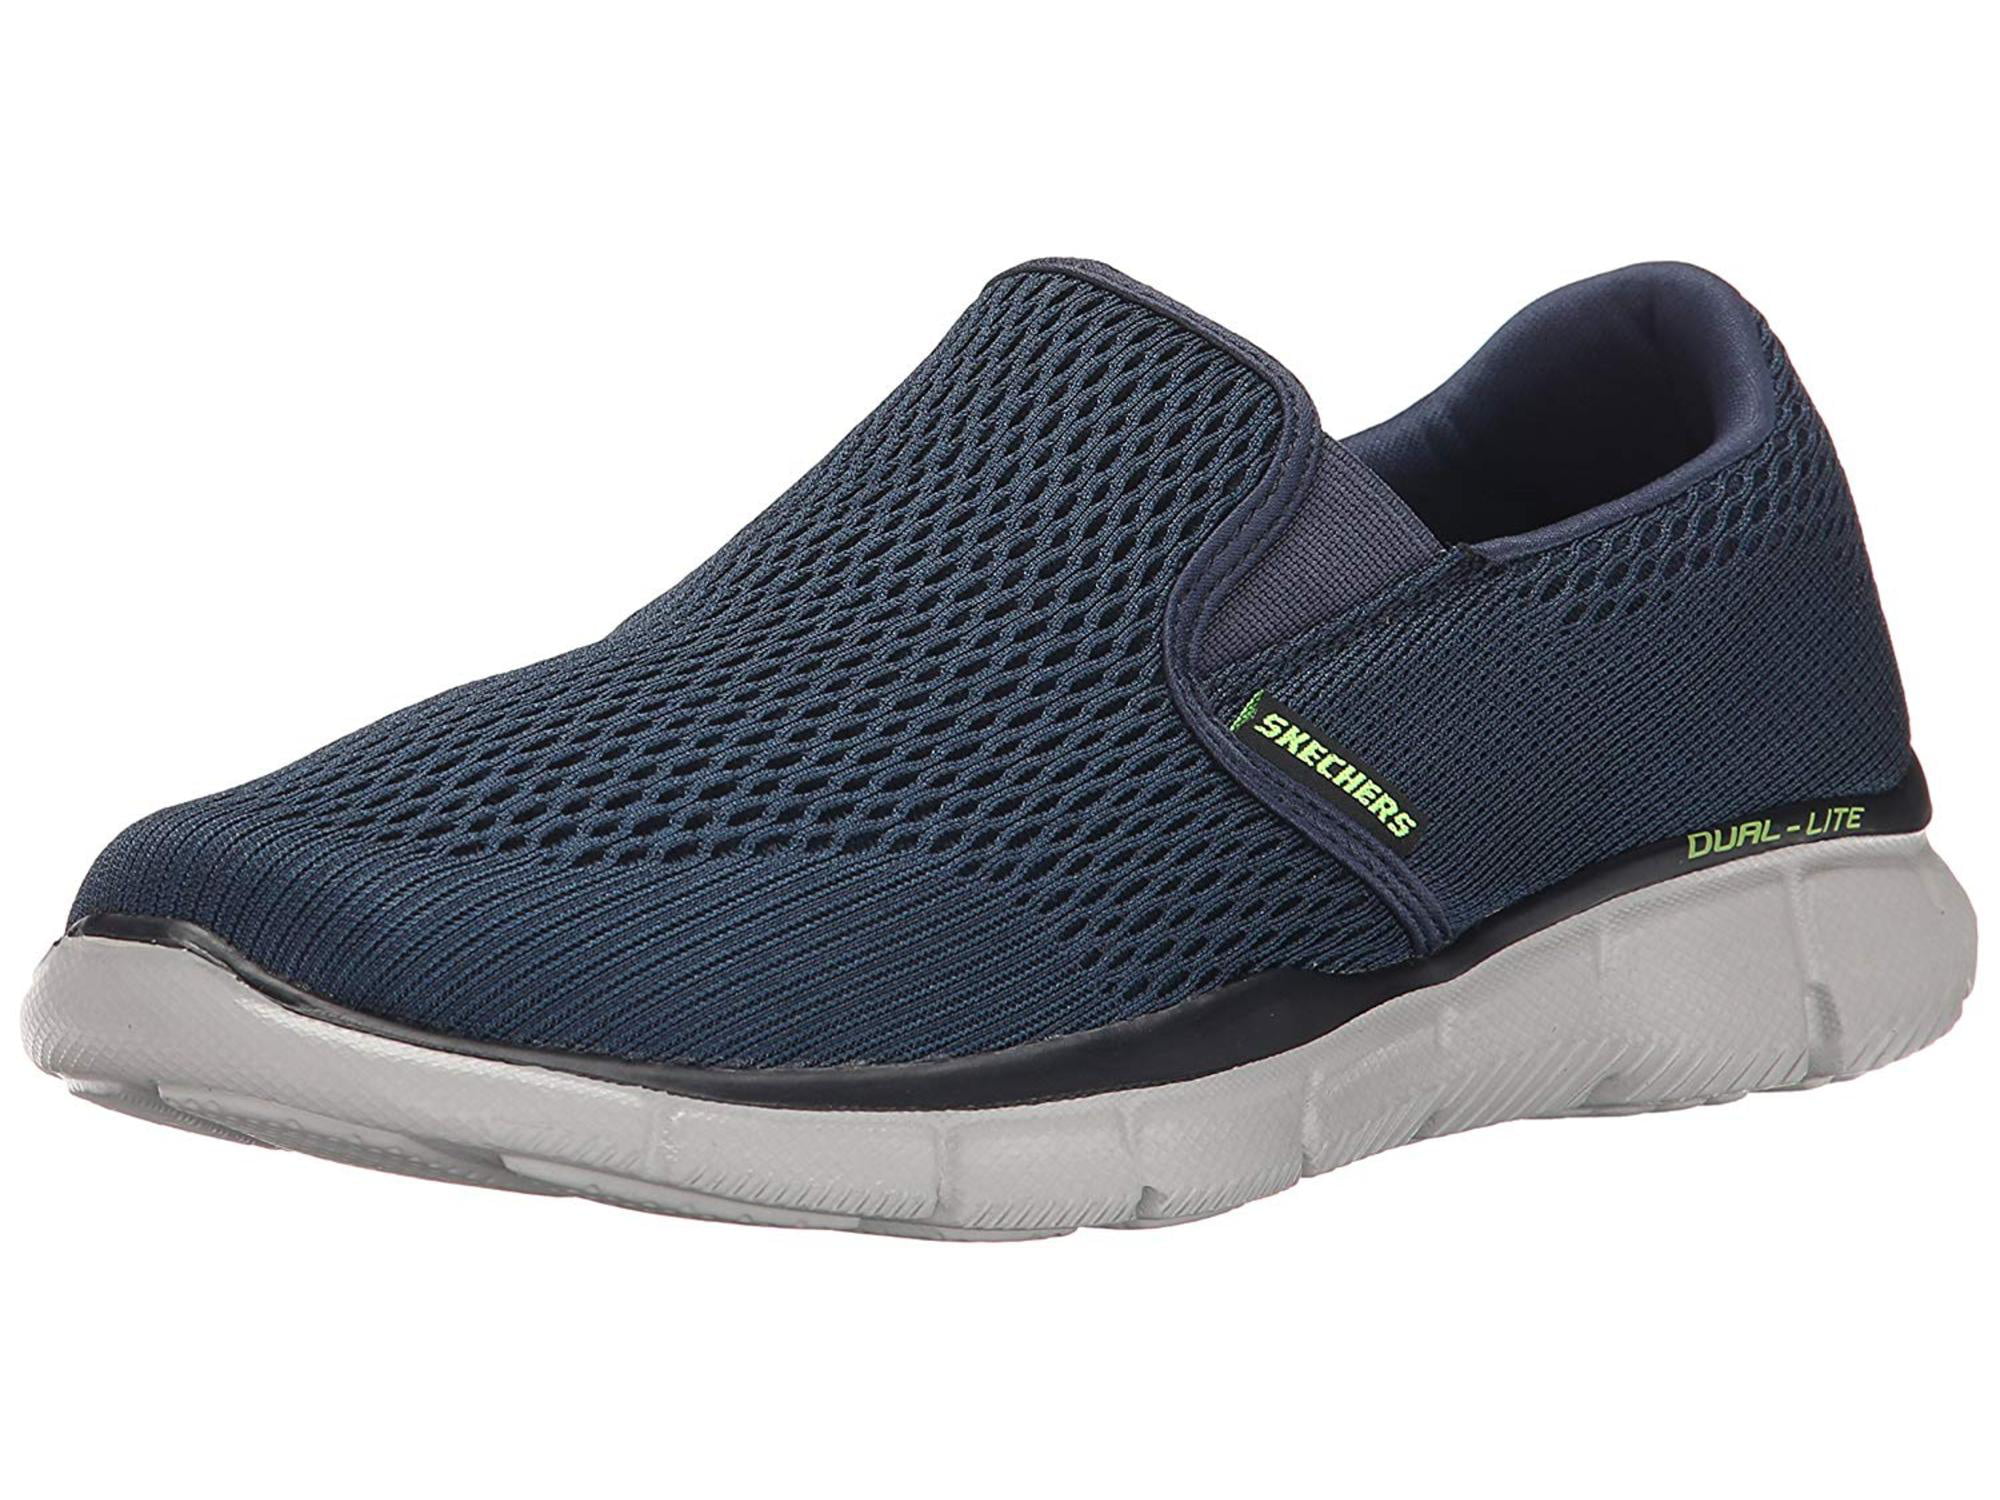 Skechers Mens Equalizer Canvas Closed Toe Slip On Shoes | Walmart Canada